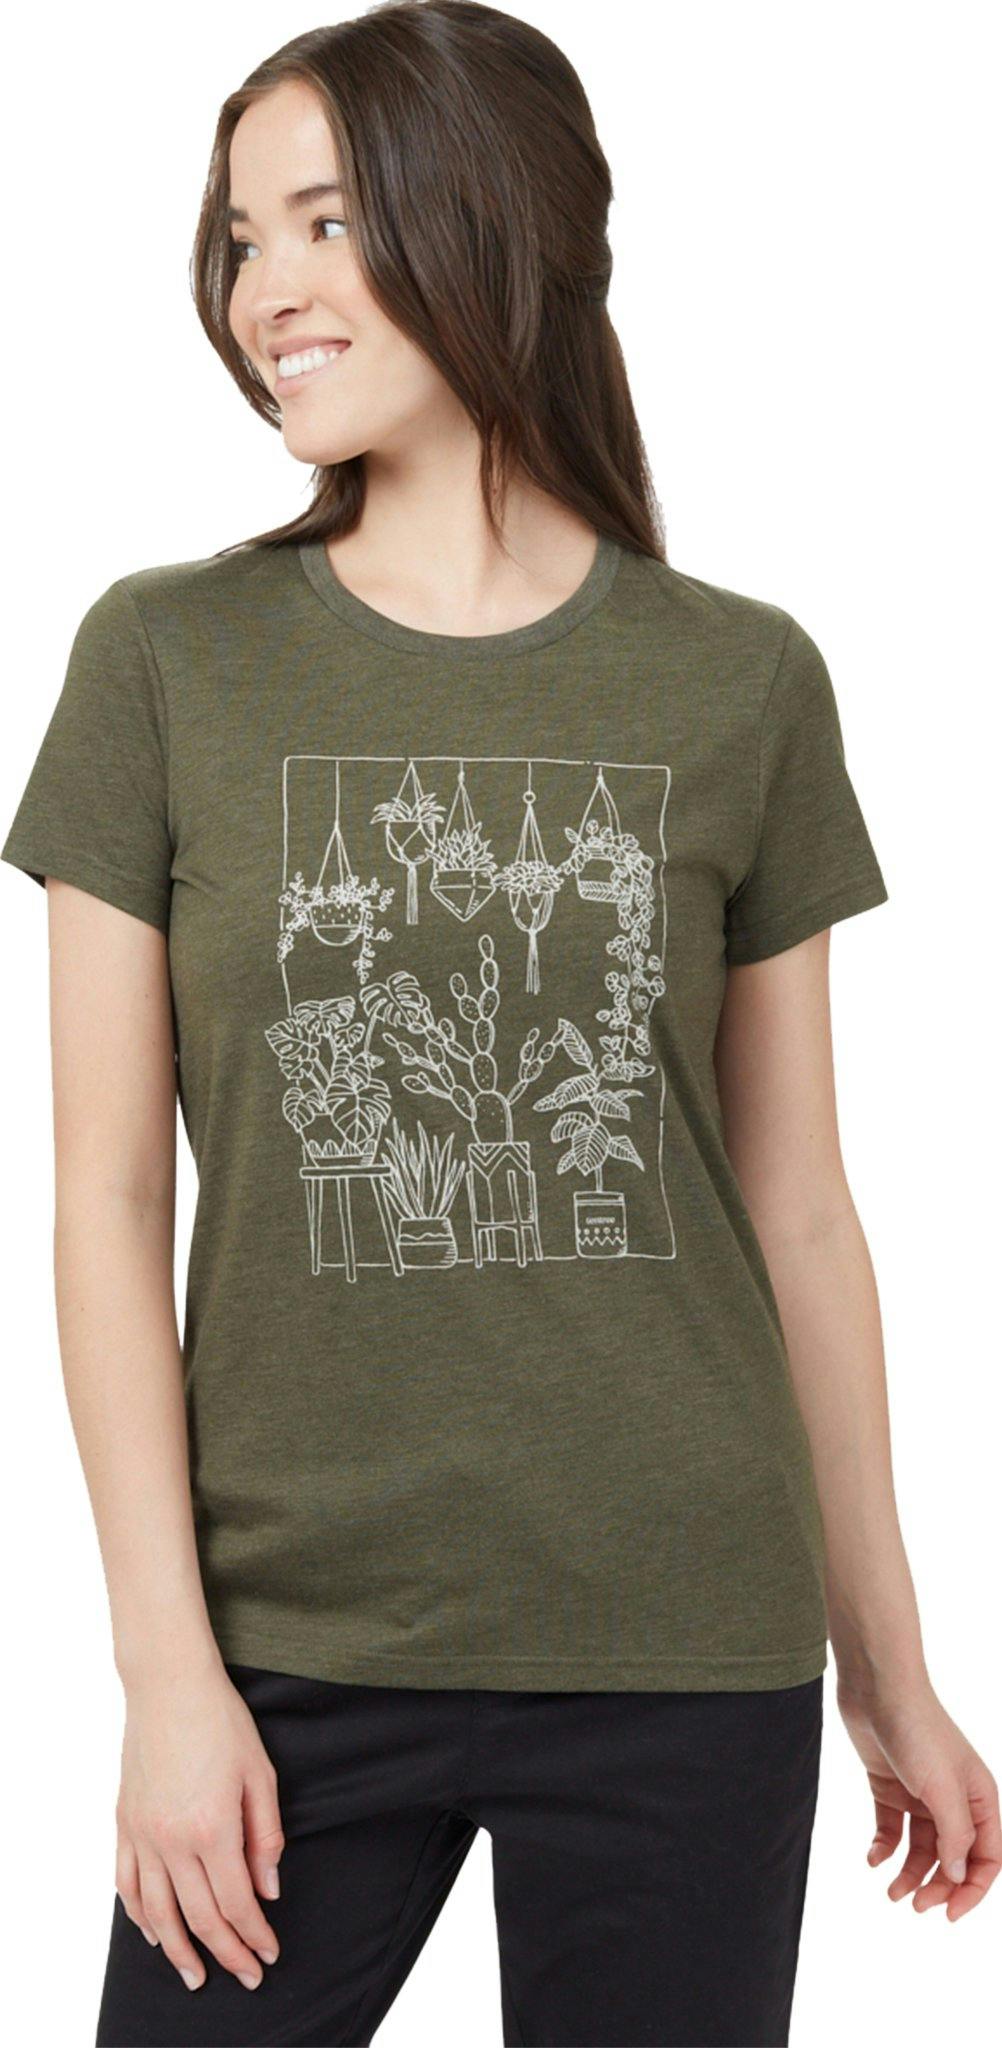 Product image for Plant Club T-Shirt - Women's